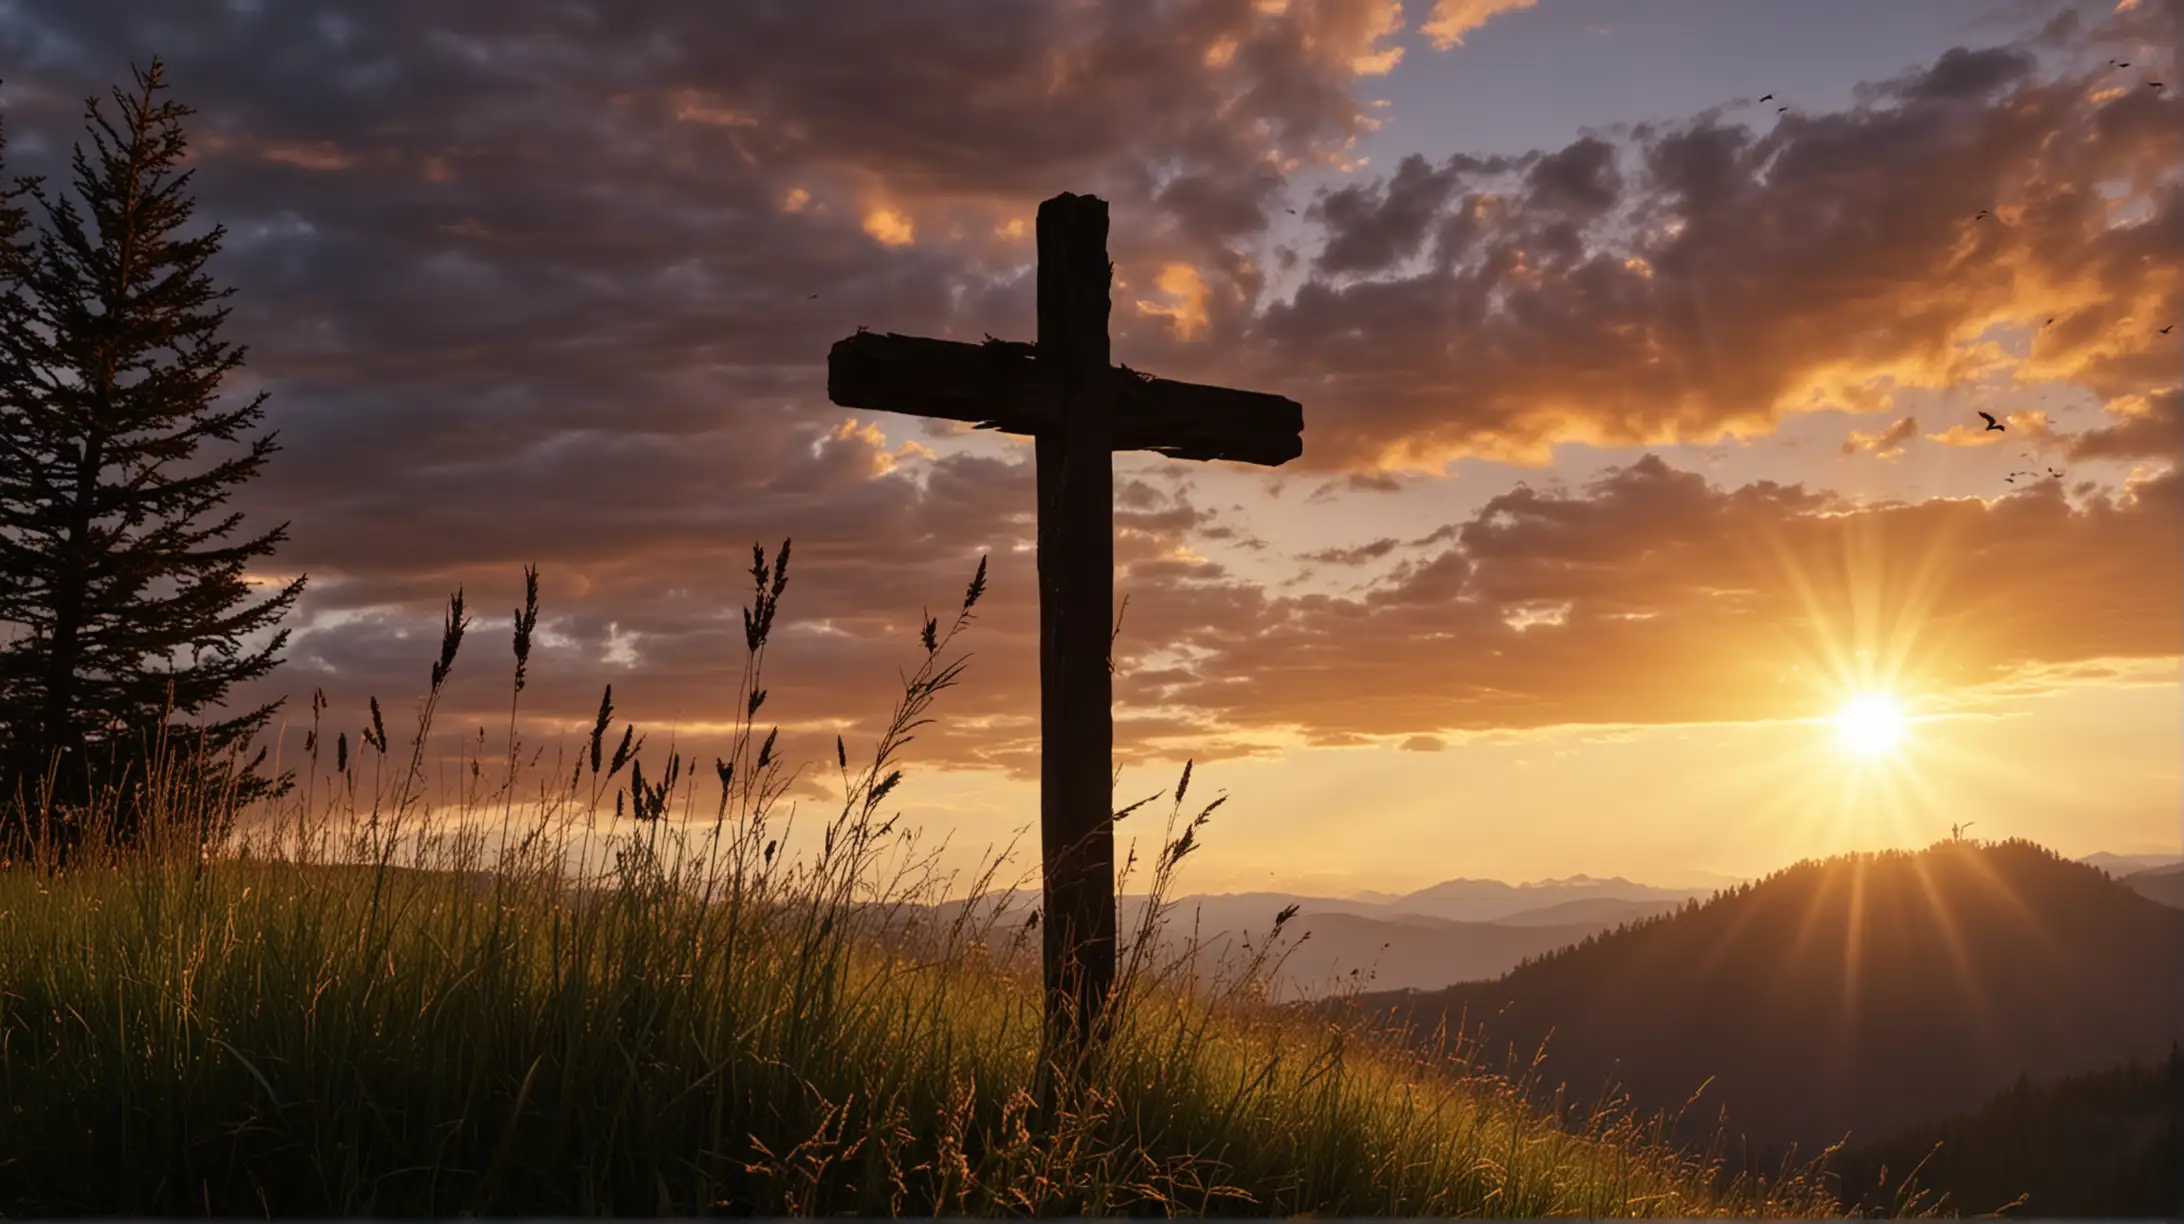 A silhouette of a big thick cross, is pictured overlooking a beautiful colorful mountain top, luscious flowing grass blows in the wind,  keep the cross big and in the foreground, keep the cross the focus of the picture, evergreen trees can be seen in the picture as if the viewer is looking out from the trees, the sun is setting in the distance, birds can be seen in the distance.